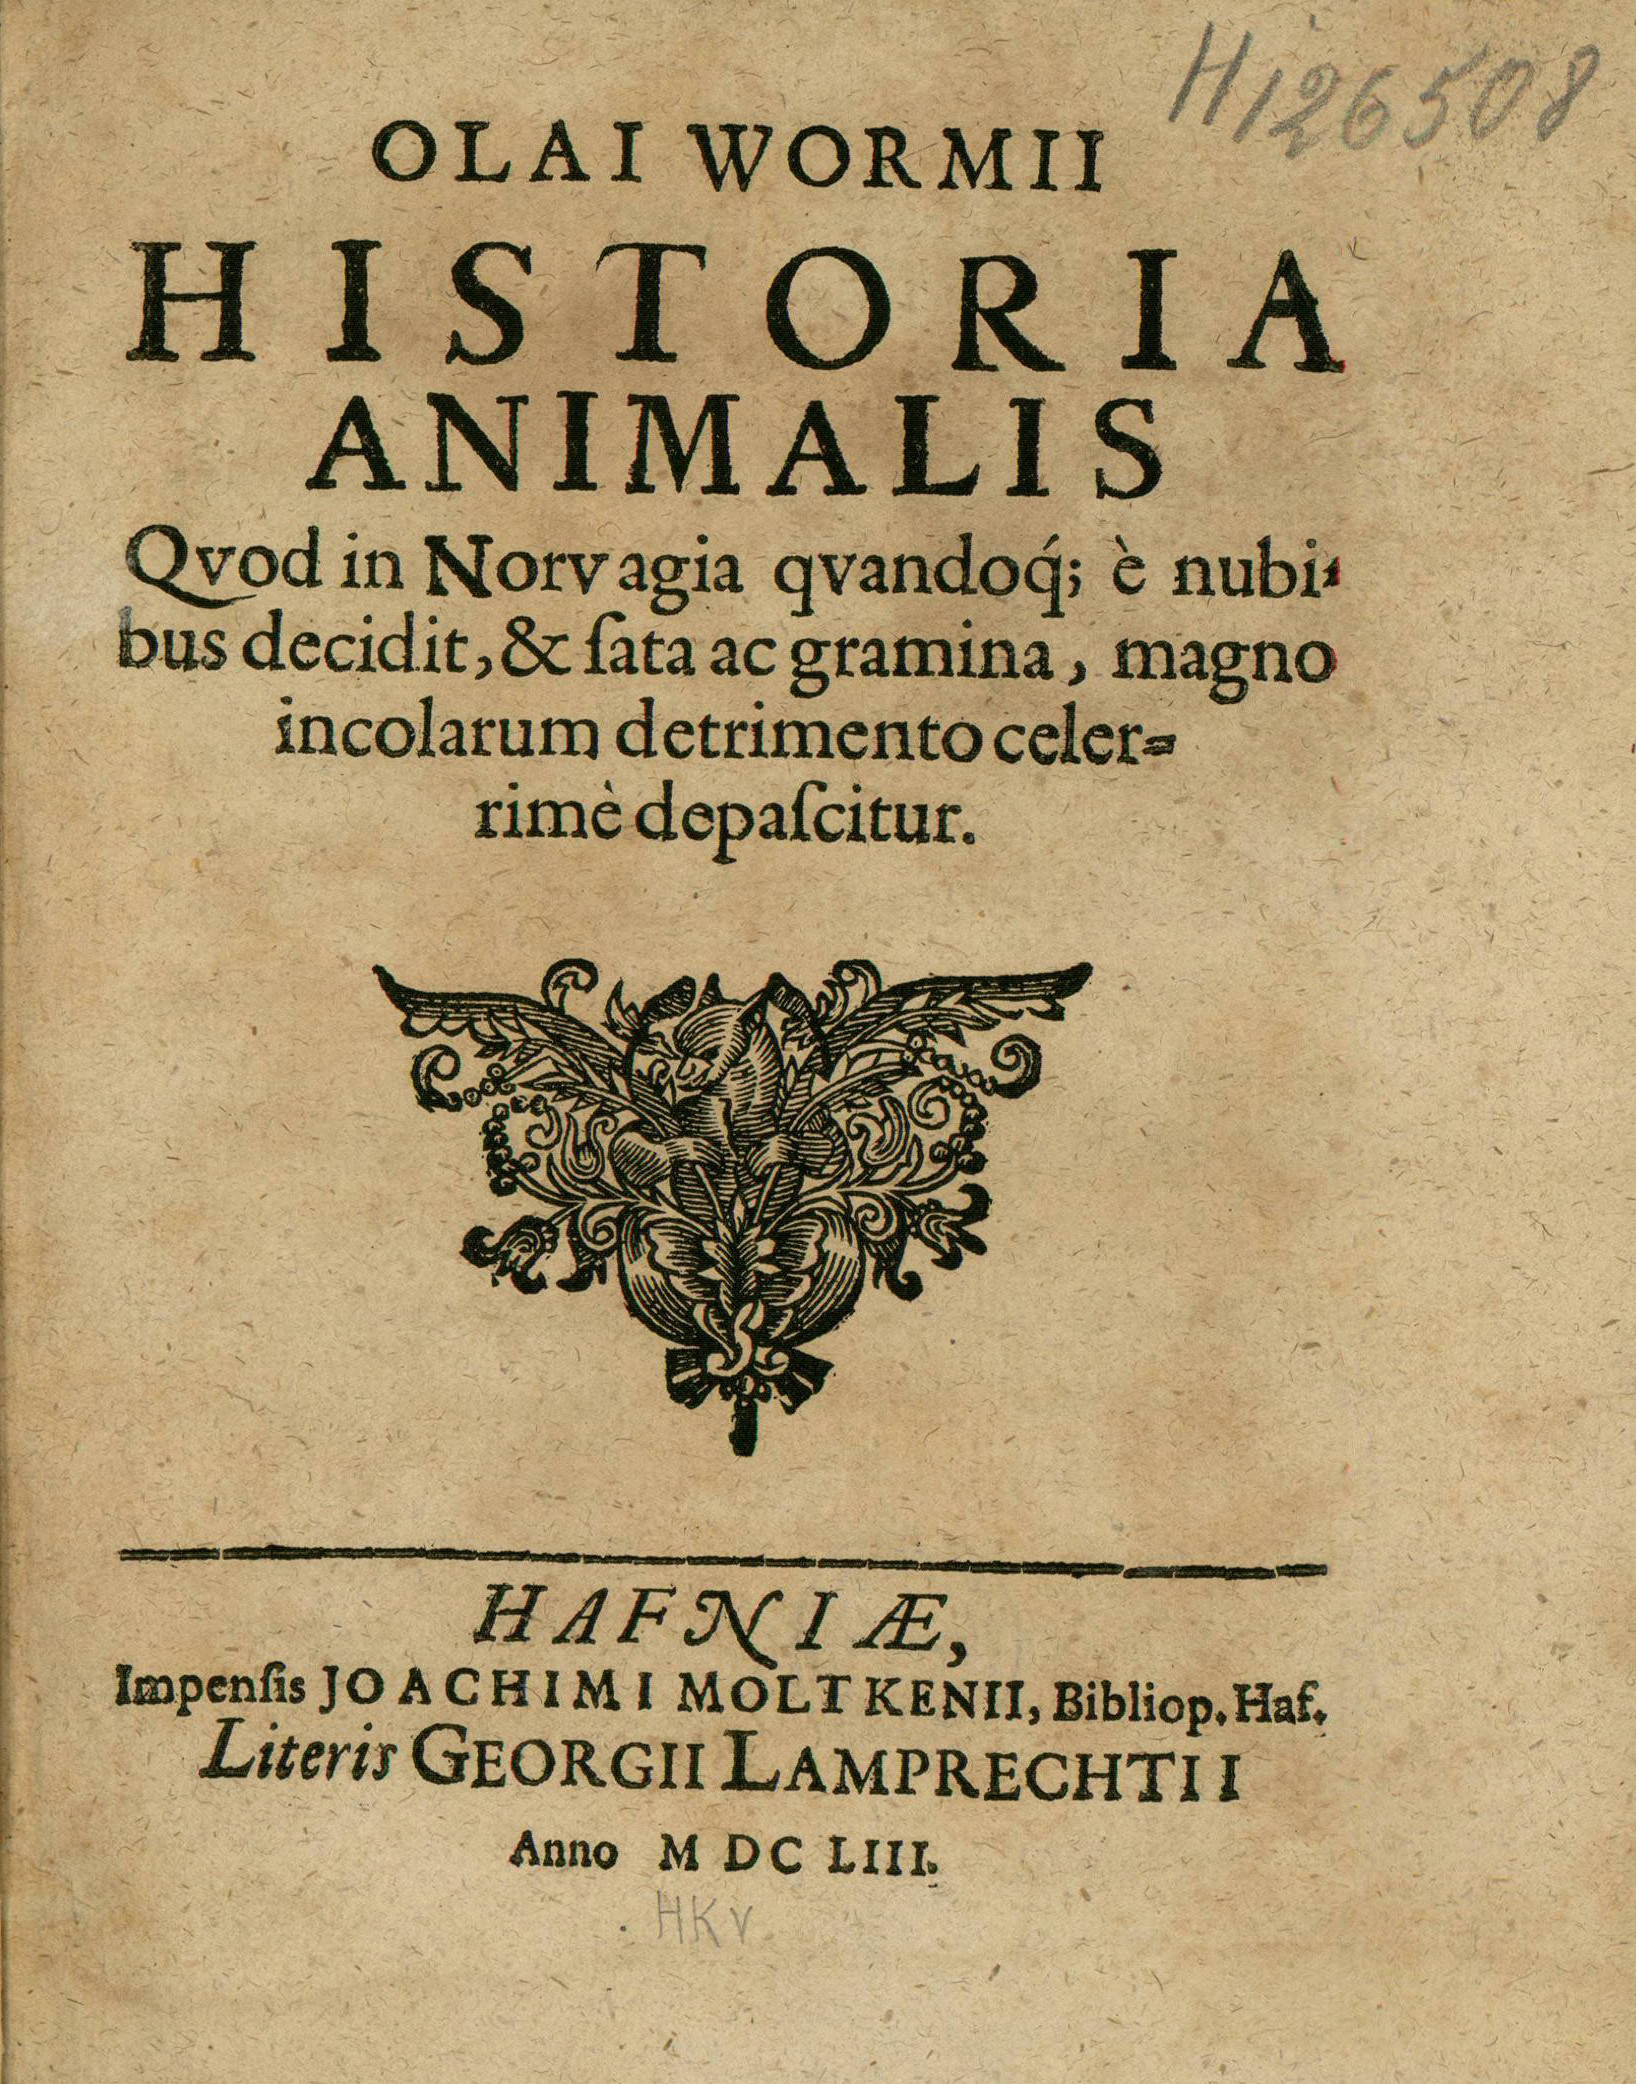 http://docnum.unistra.fr/cdm/ref/collection/coll6/id/7677